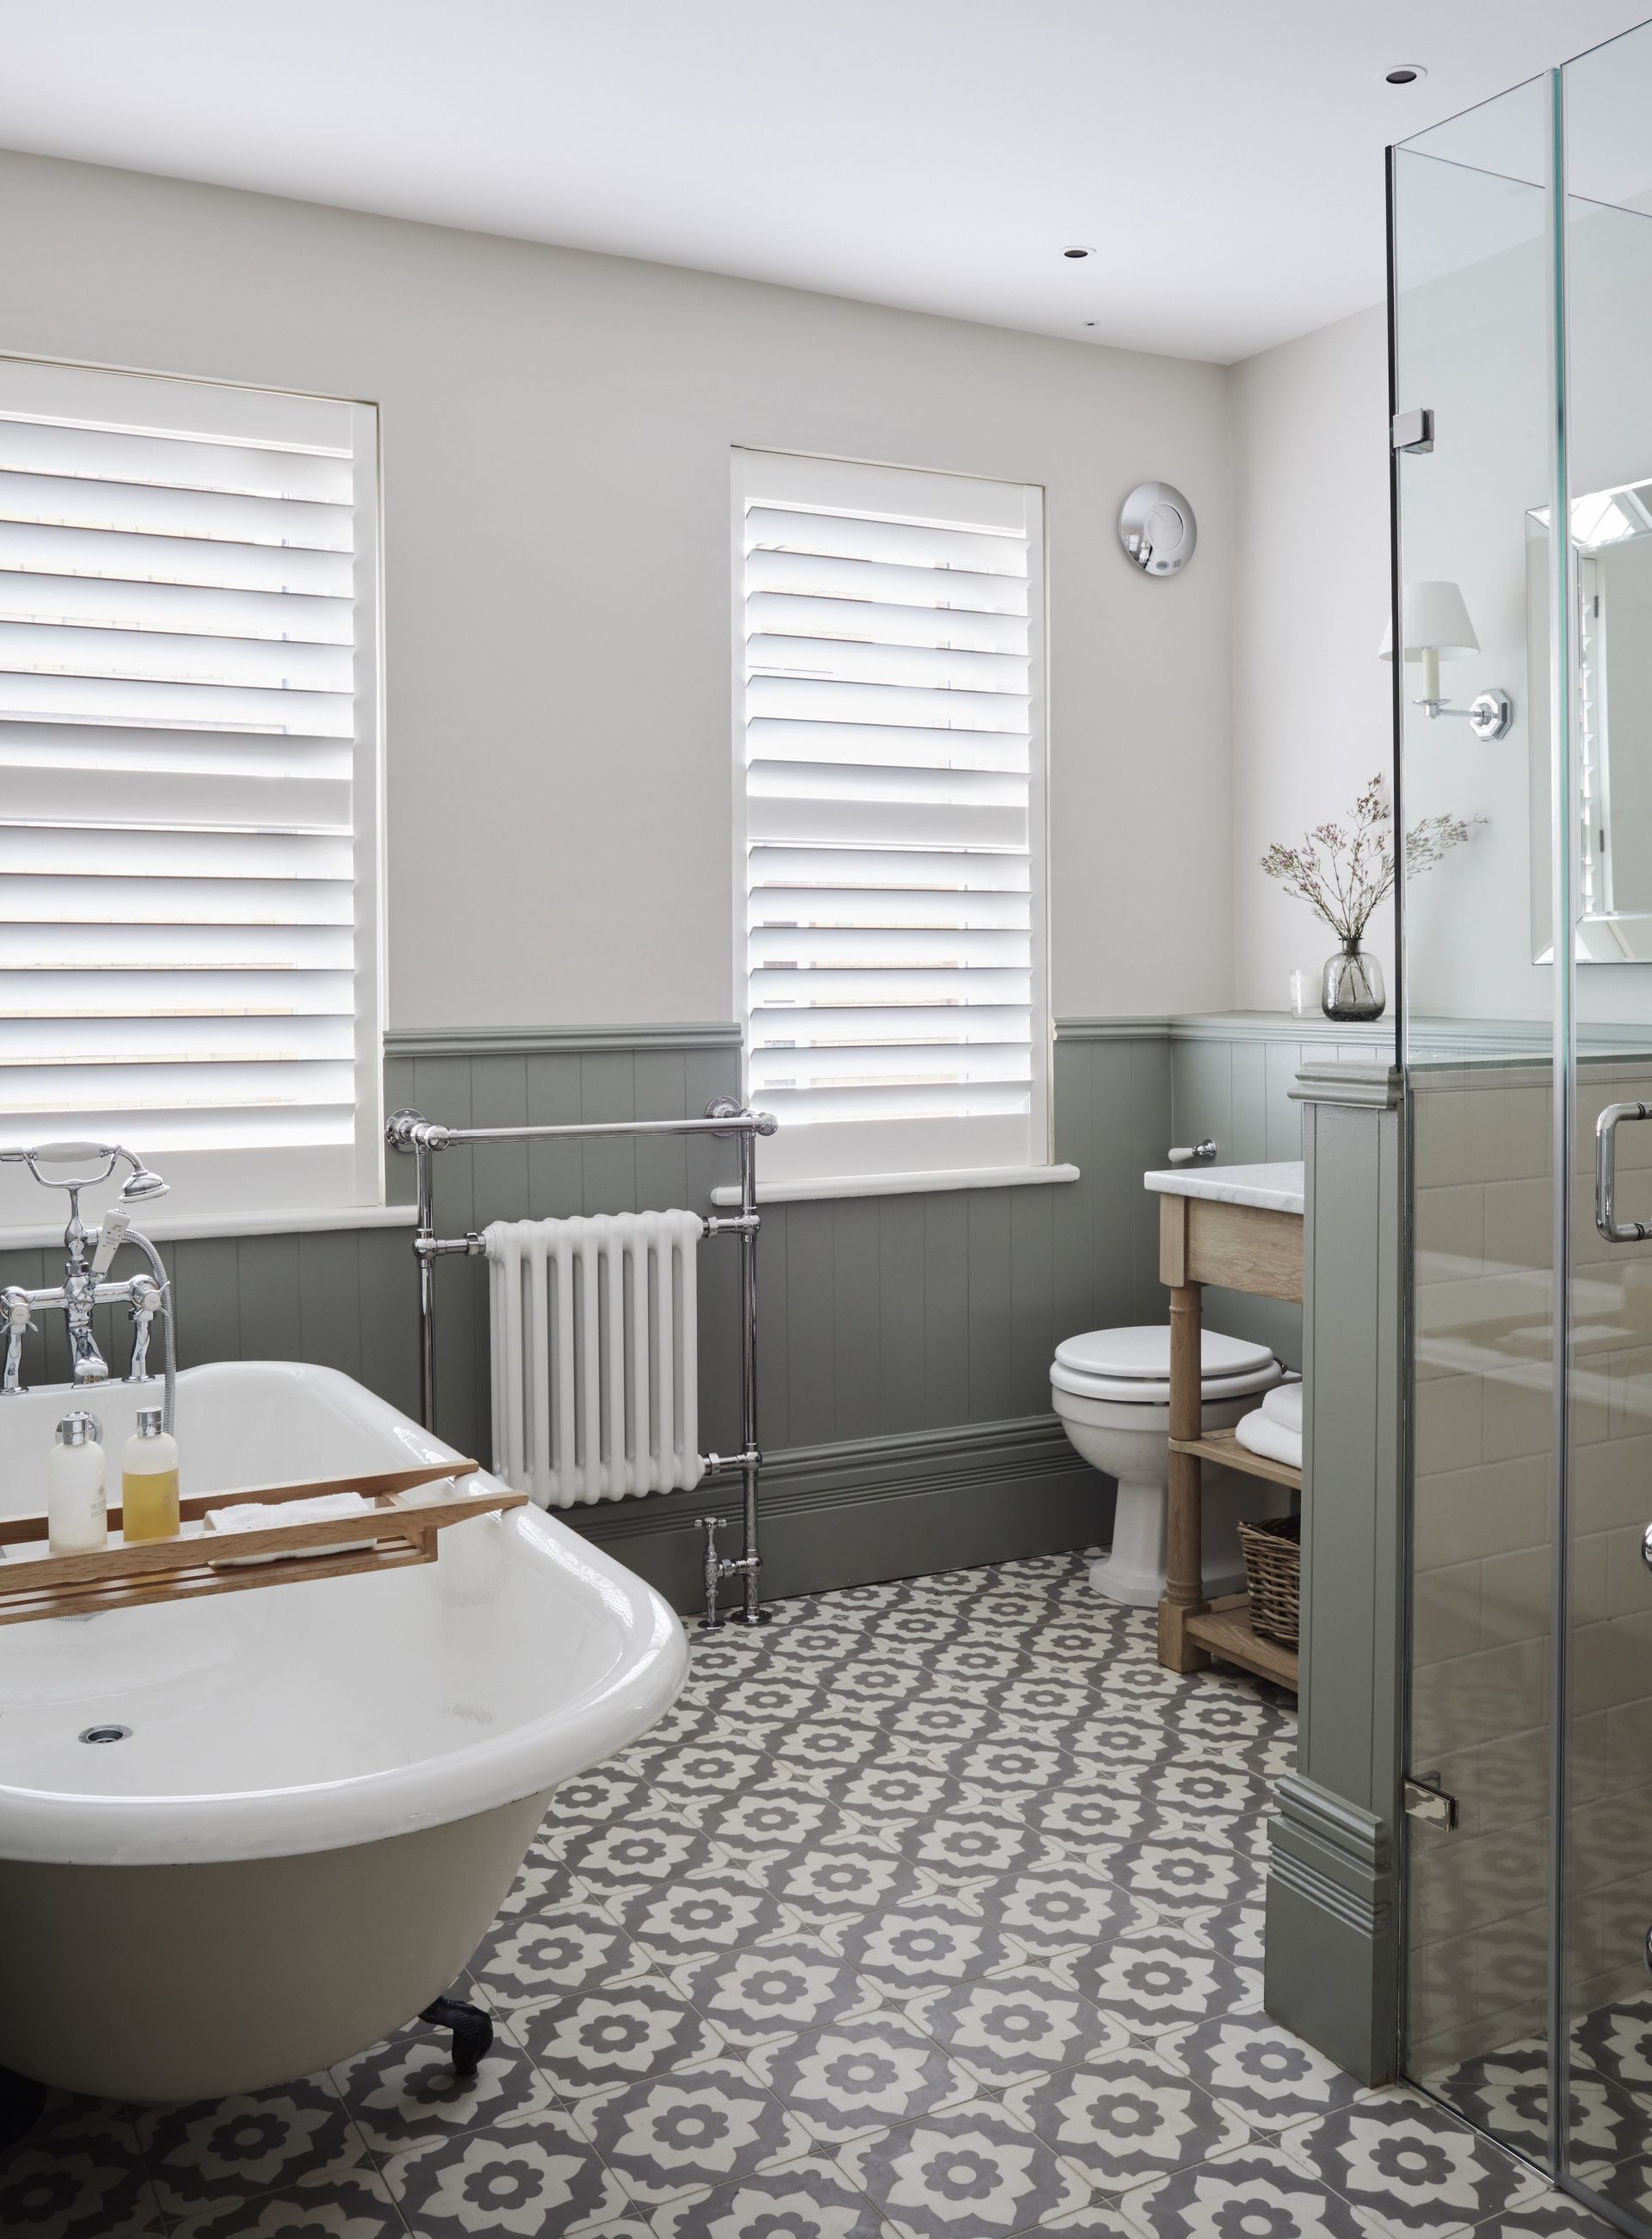 Family bathroom ideas – 20 practical but pretty rooms to suit all ages